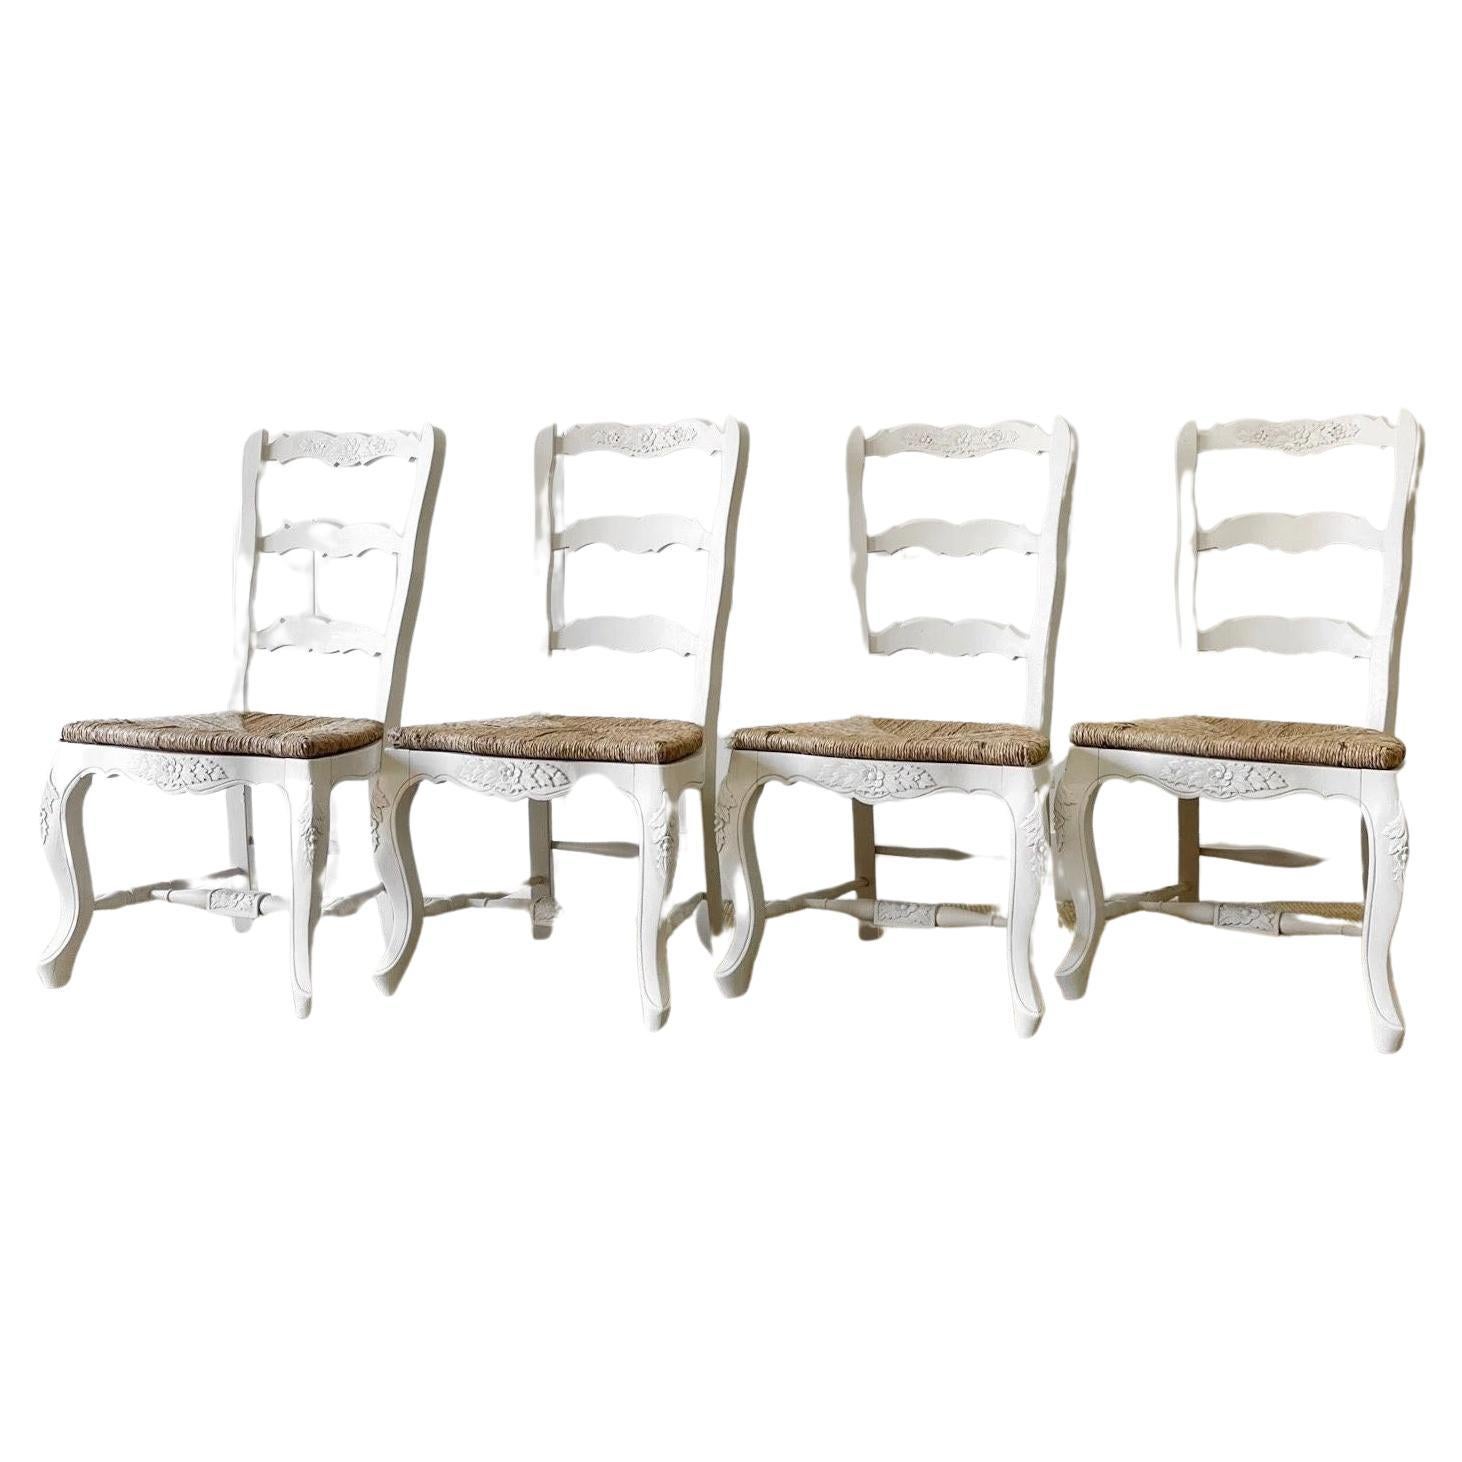 A Set of 4 Painted French Oak Ladder Back Chairs For Sale